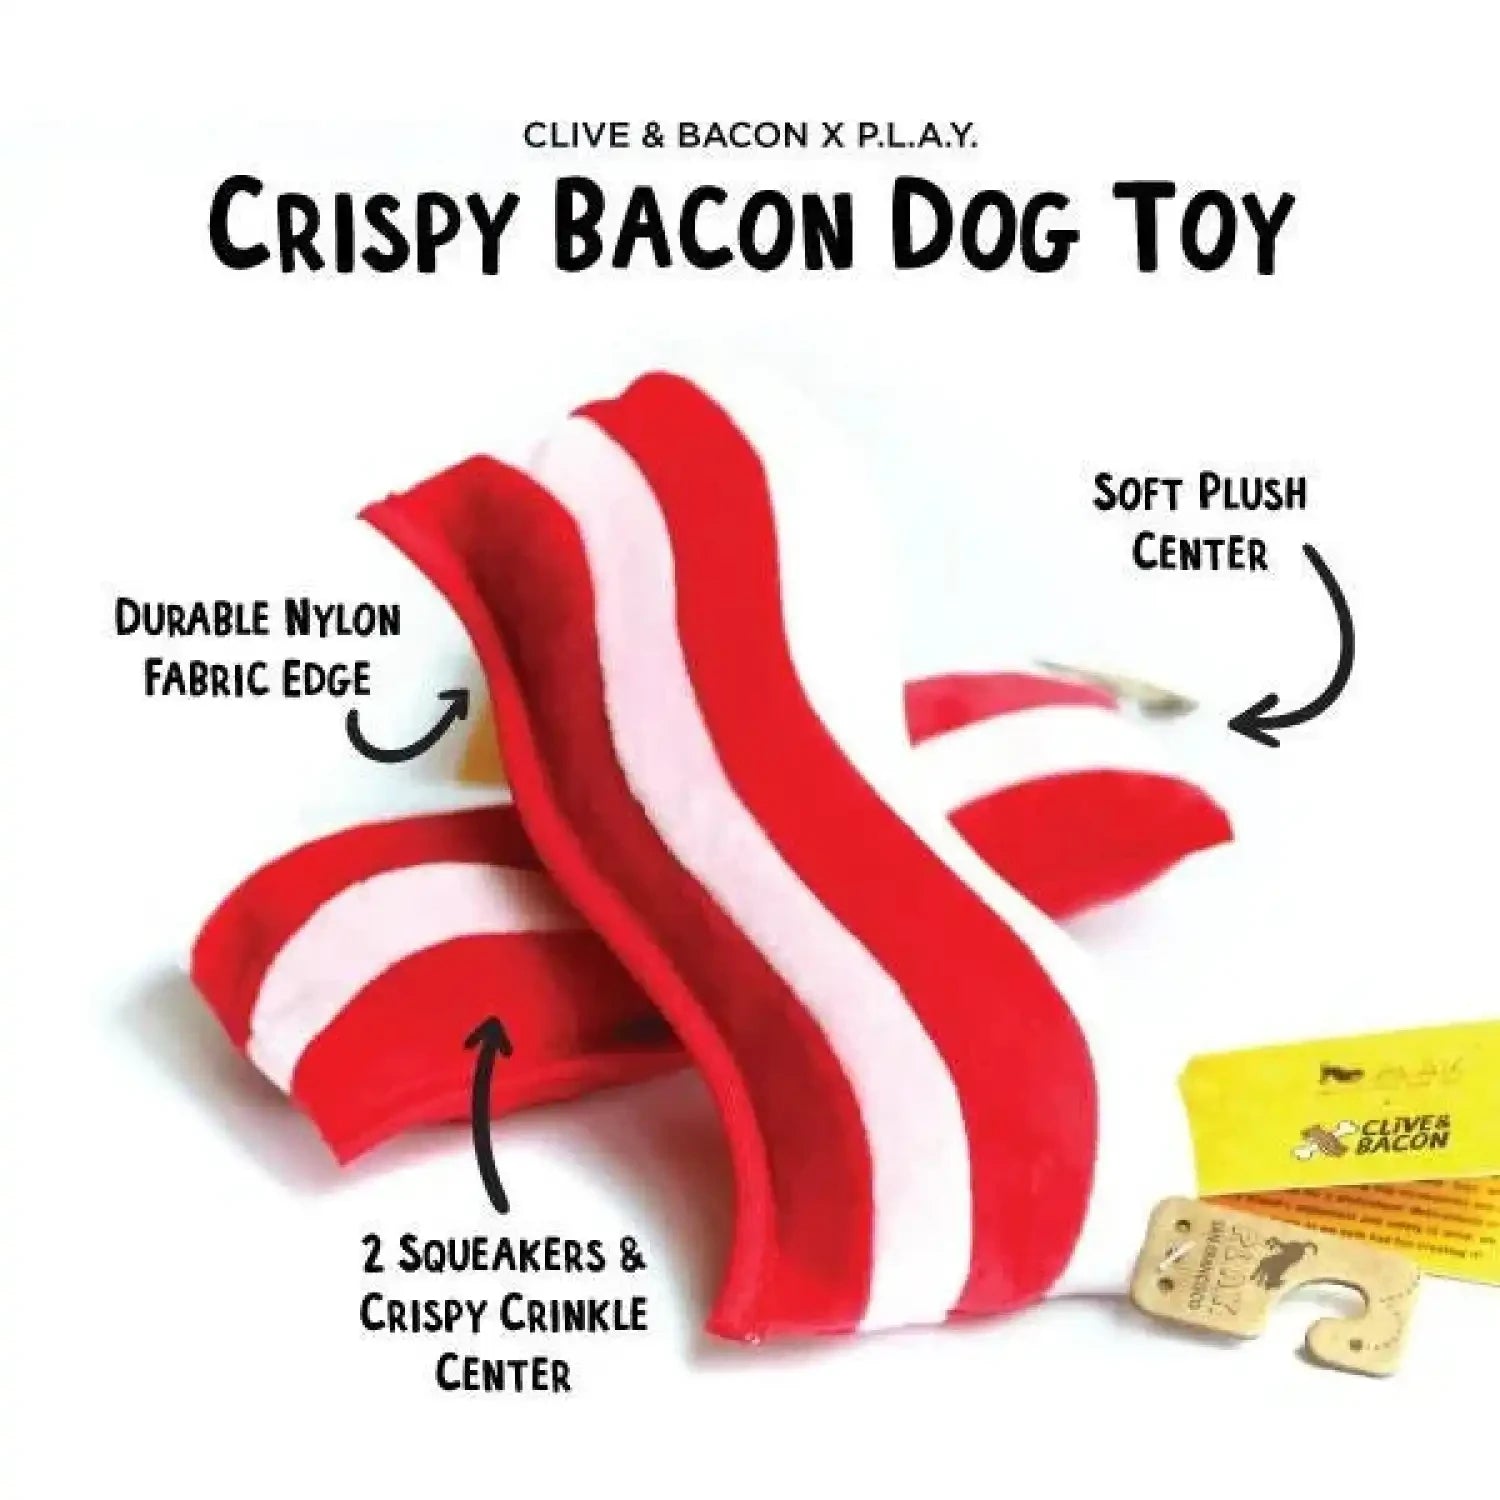 Clive and Bacon x PLAY Crispy Bacon Dog Toy